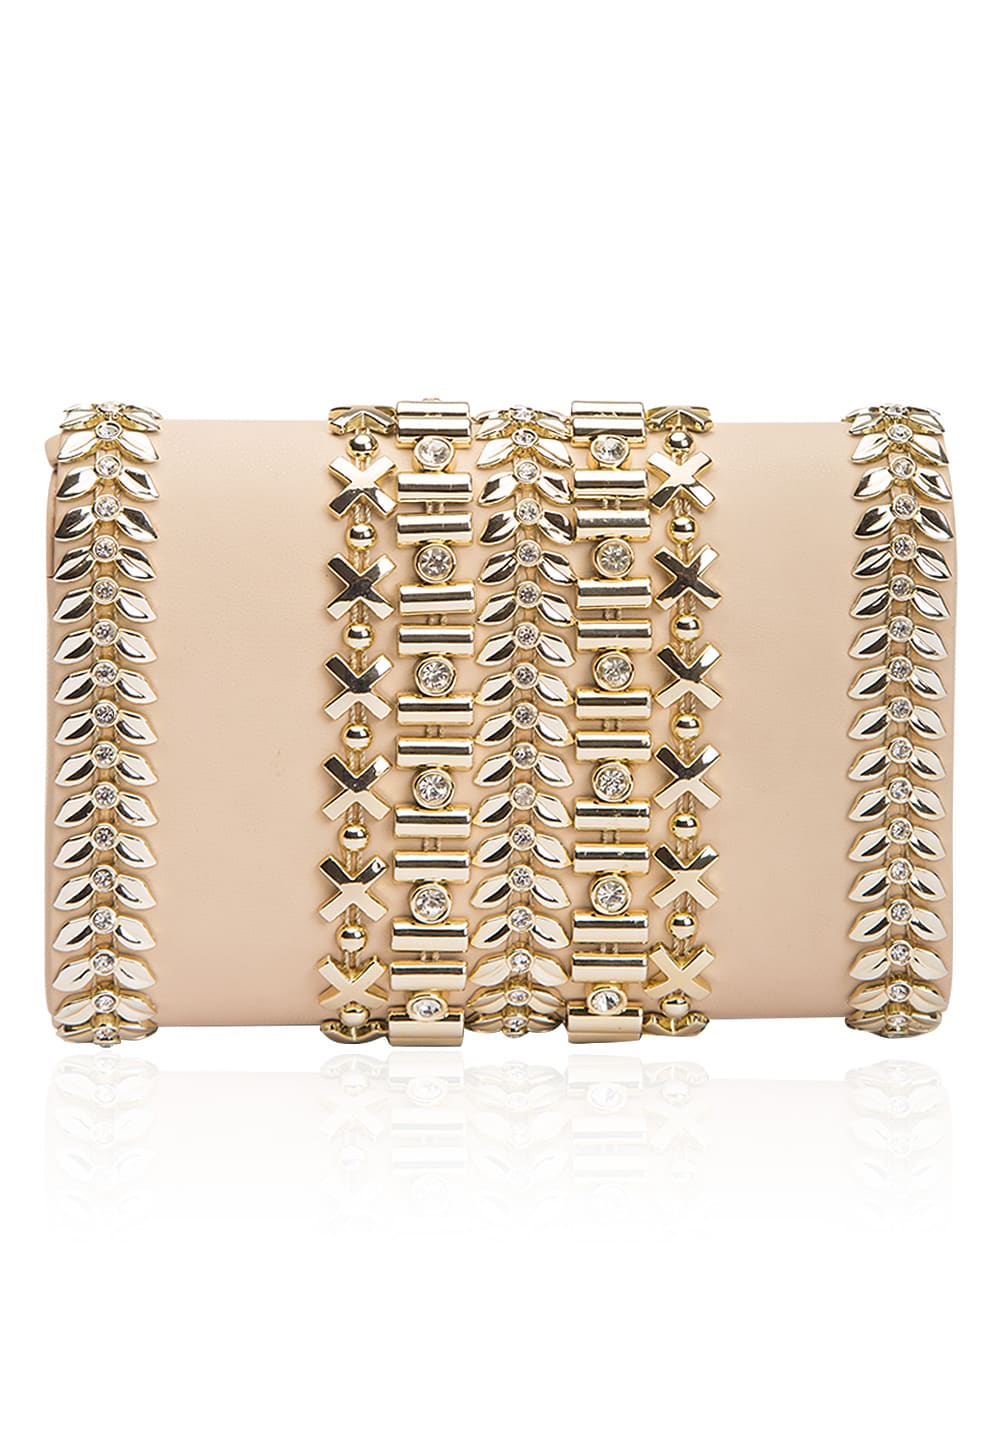 Nude Peach and Gold Metallic Belt Flapover Clutch available only at IBFW